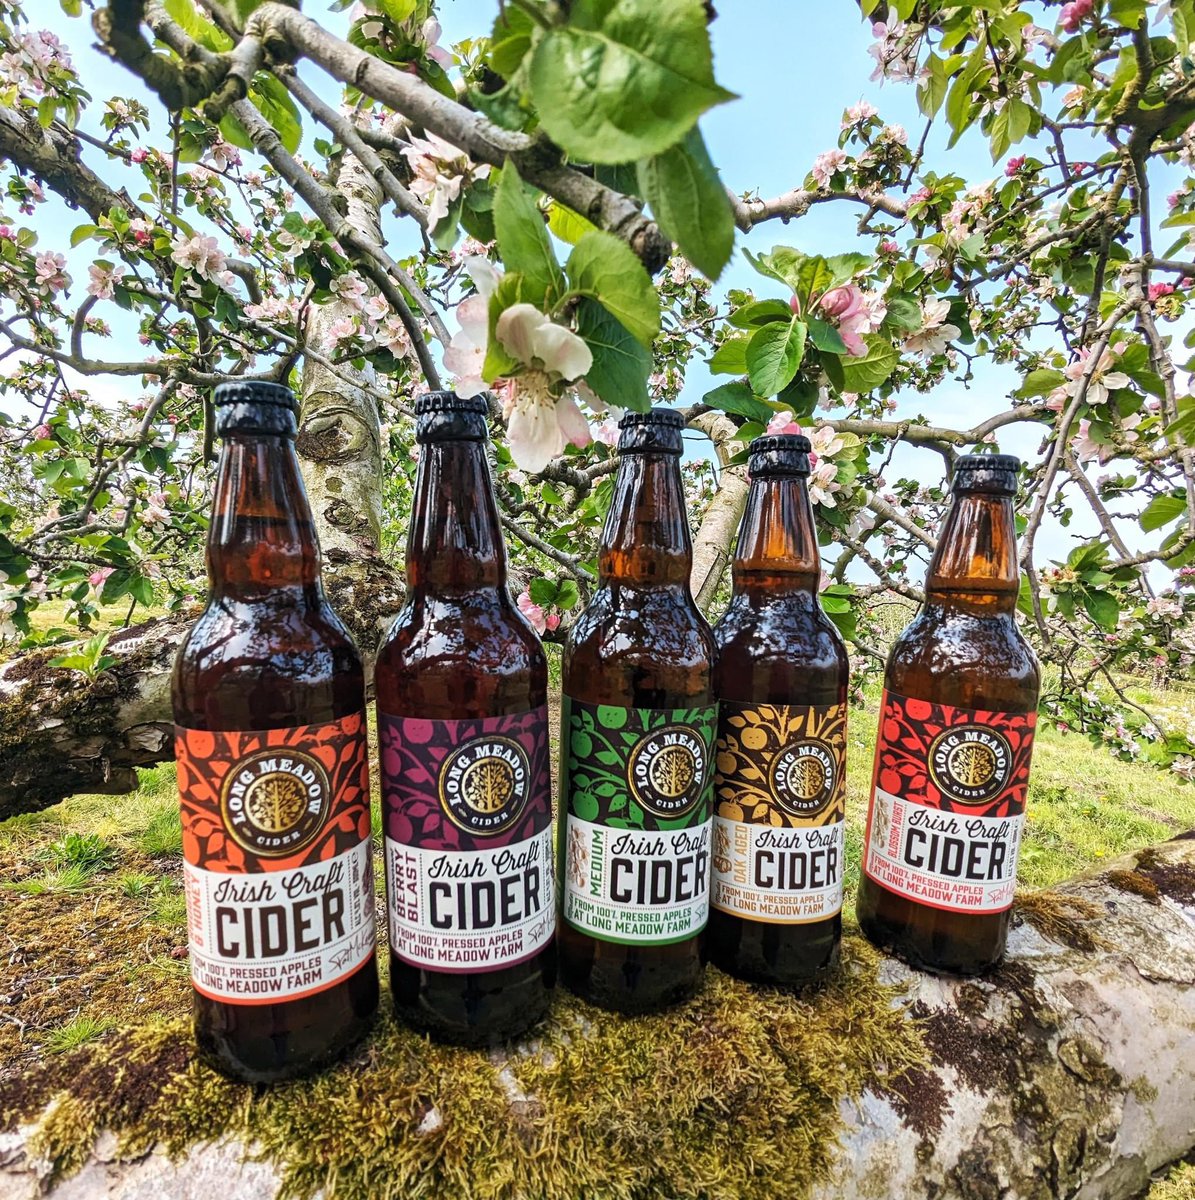 Cheers to sunshine and cider! 🌞🍻 What's your go-to flavour for those sunny days? longmeadowcider.com/products/ 🍎